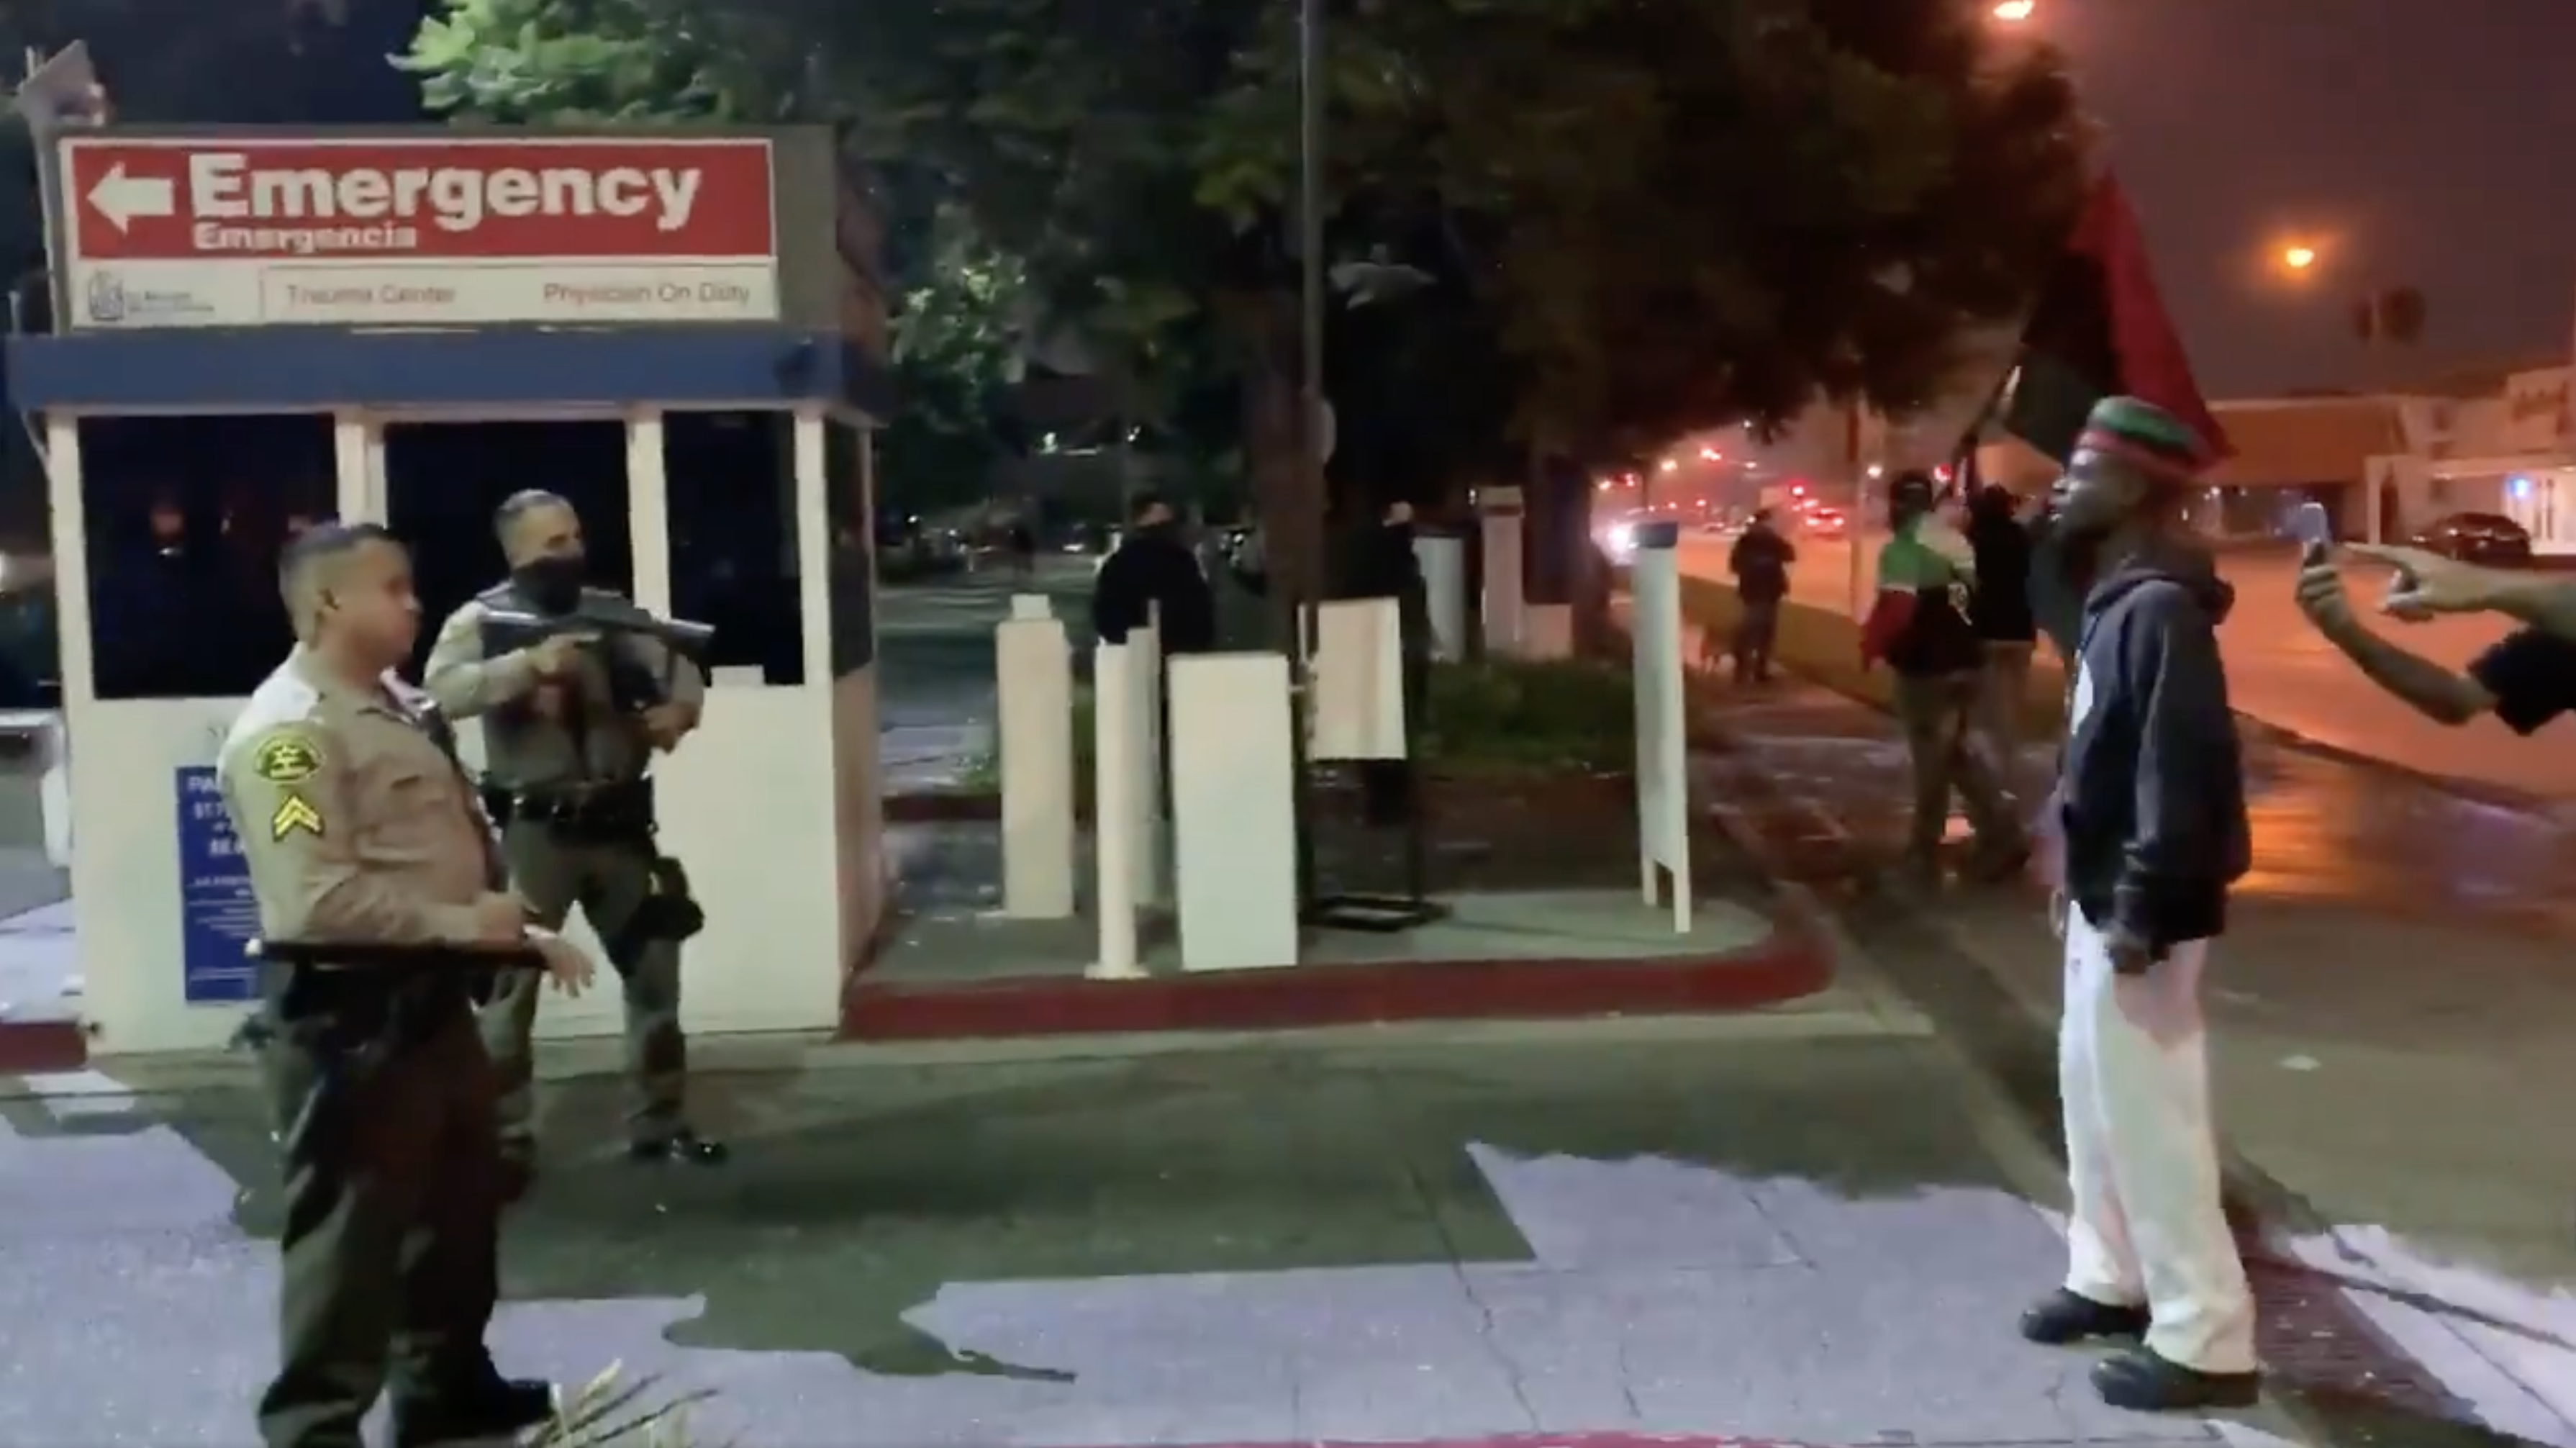 A small group of demonstrators outside a hospital in Lynwood, California confronted by Los Angeles Sheriff's Department deputies with their weapons aimed at them.